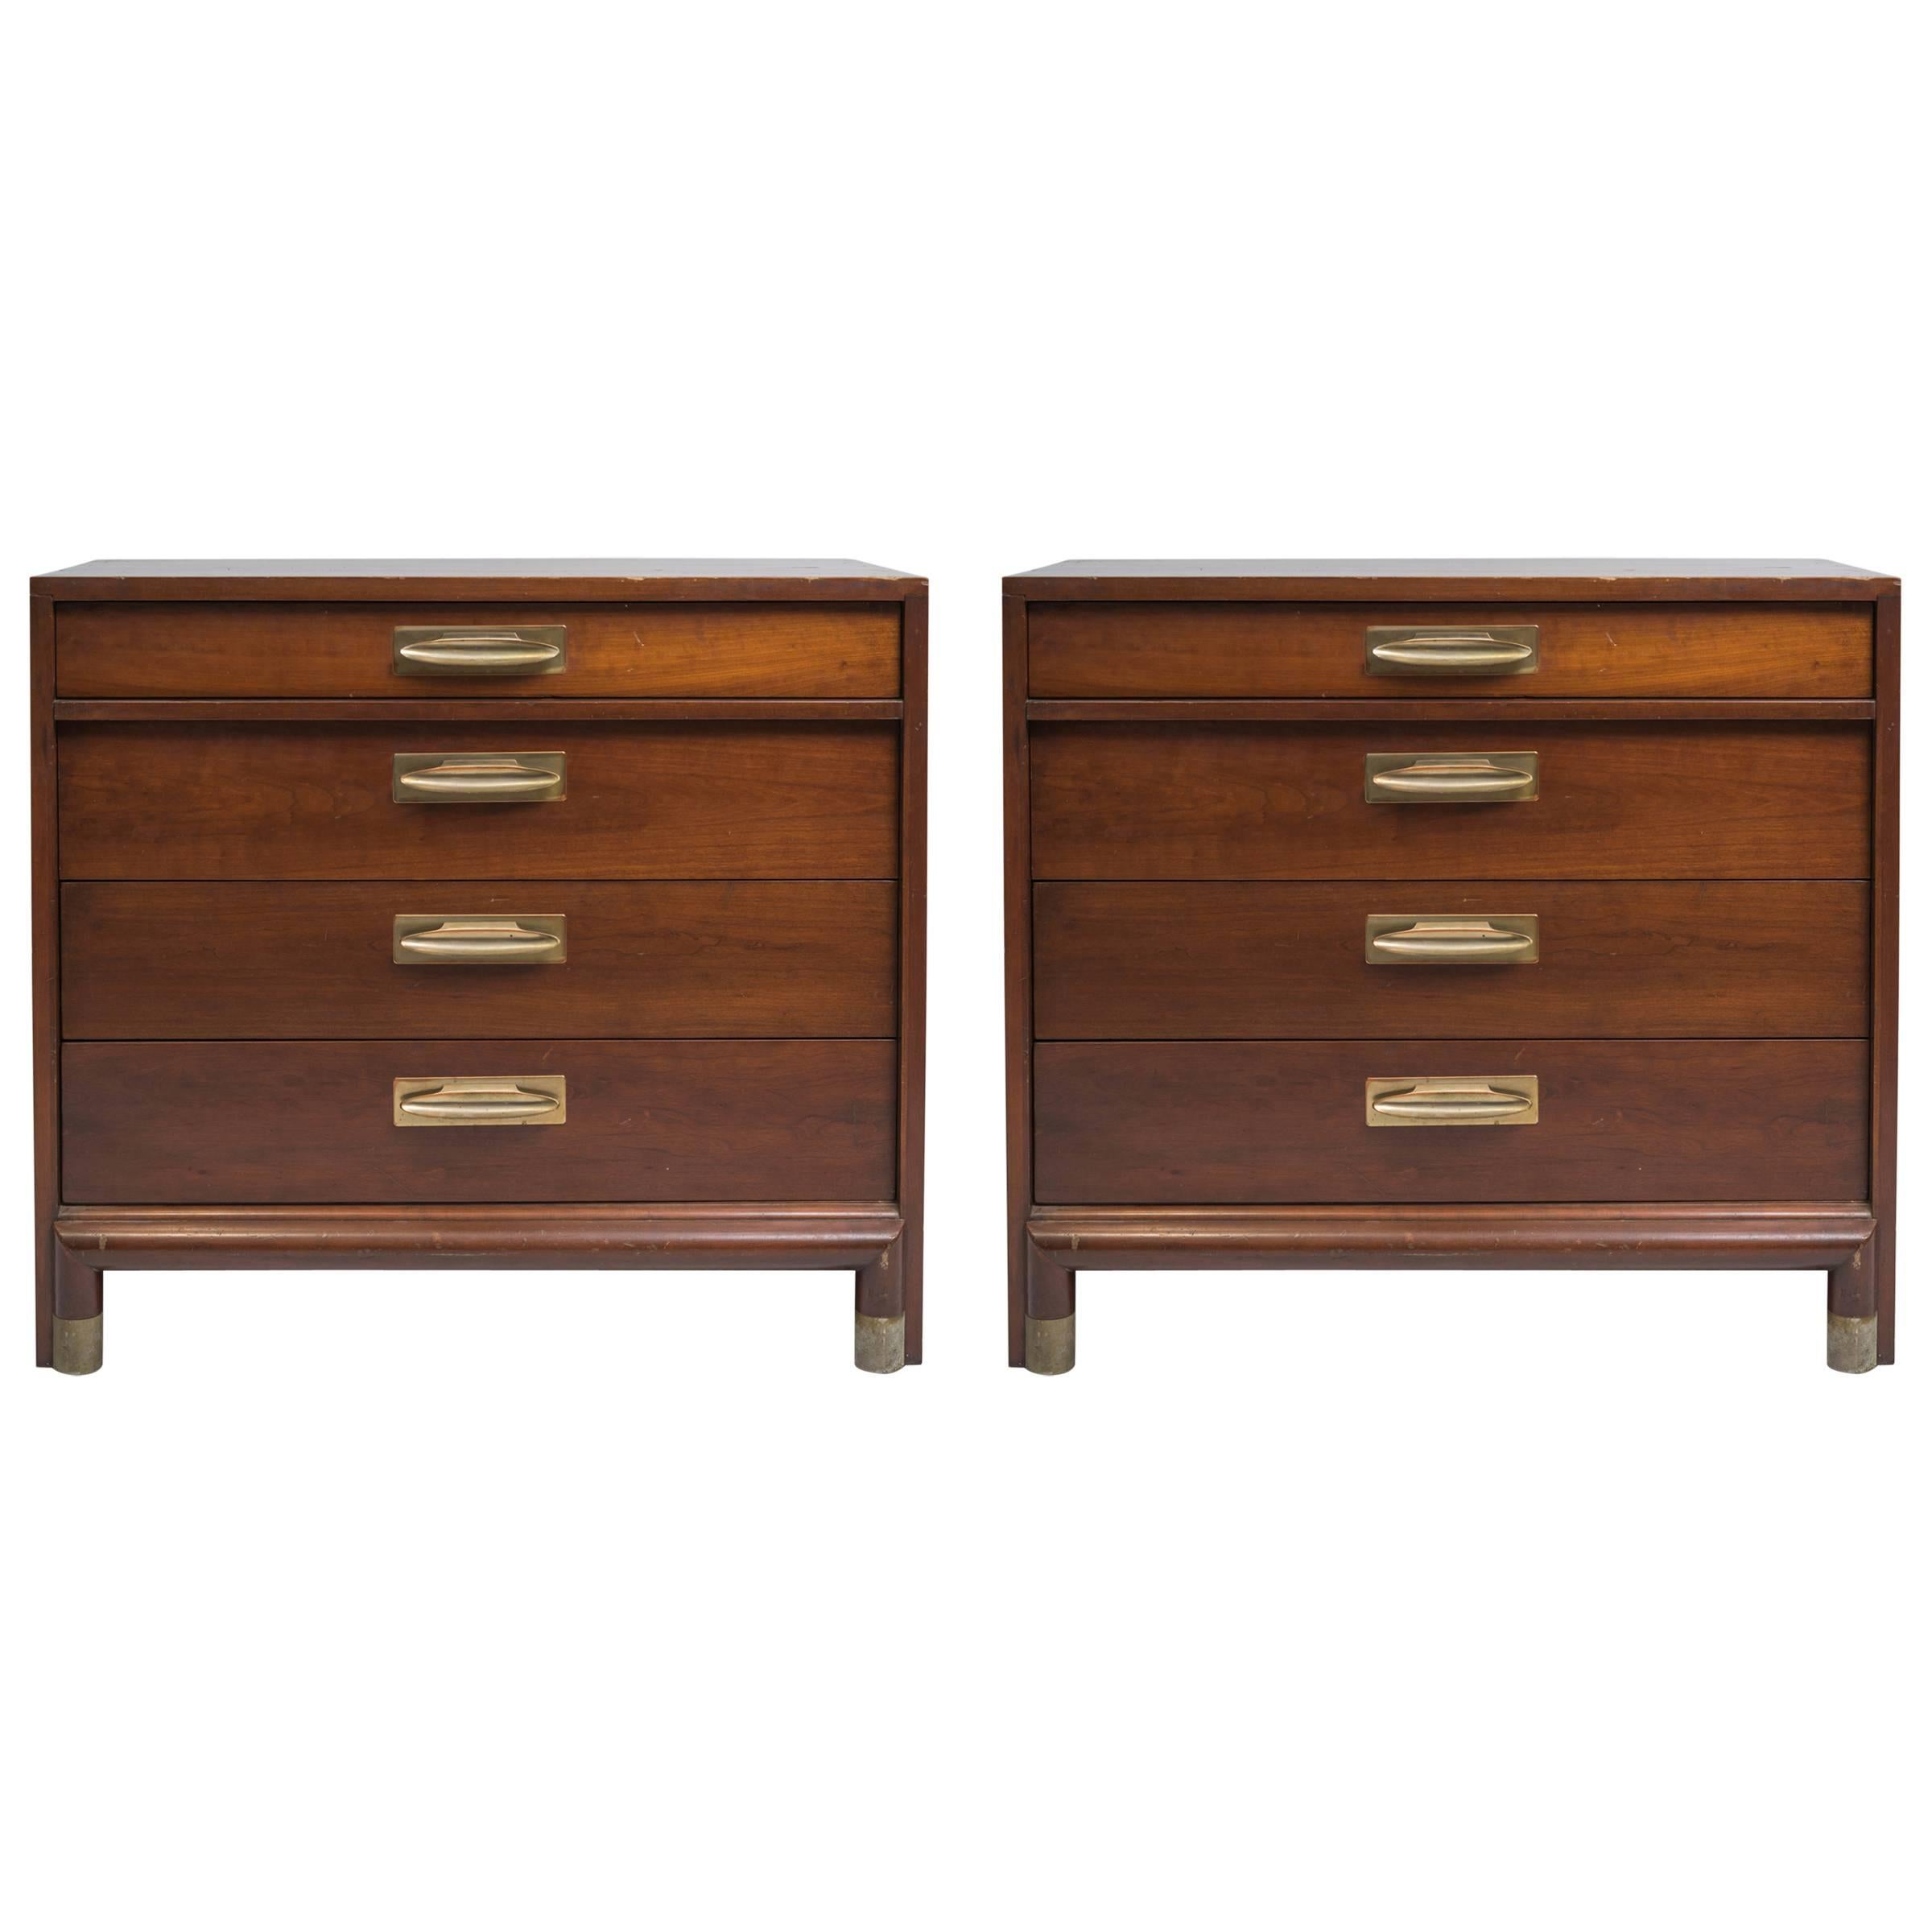 Pair of 1950s Bachelor Chests by Willett